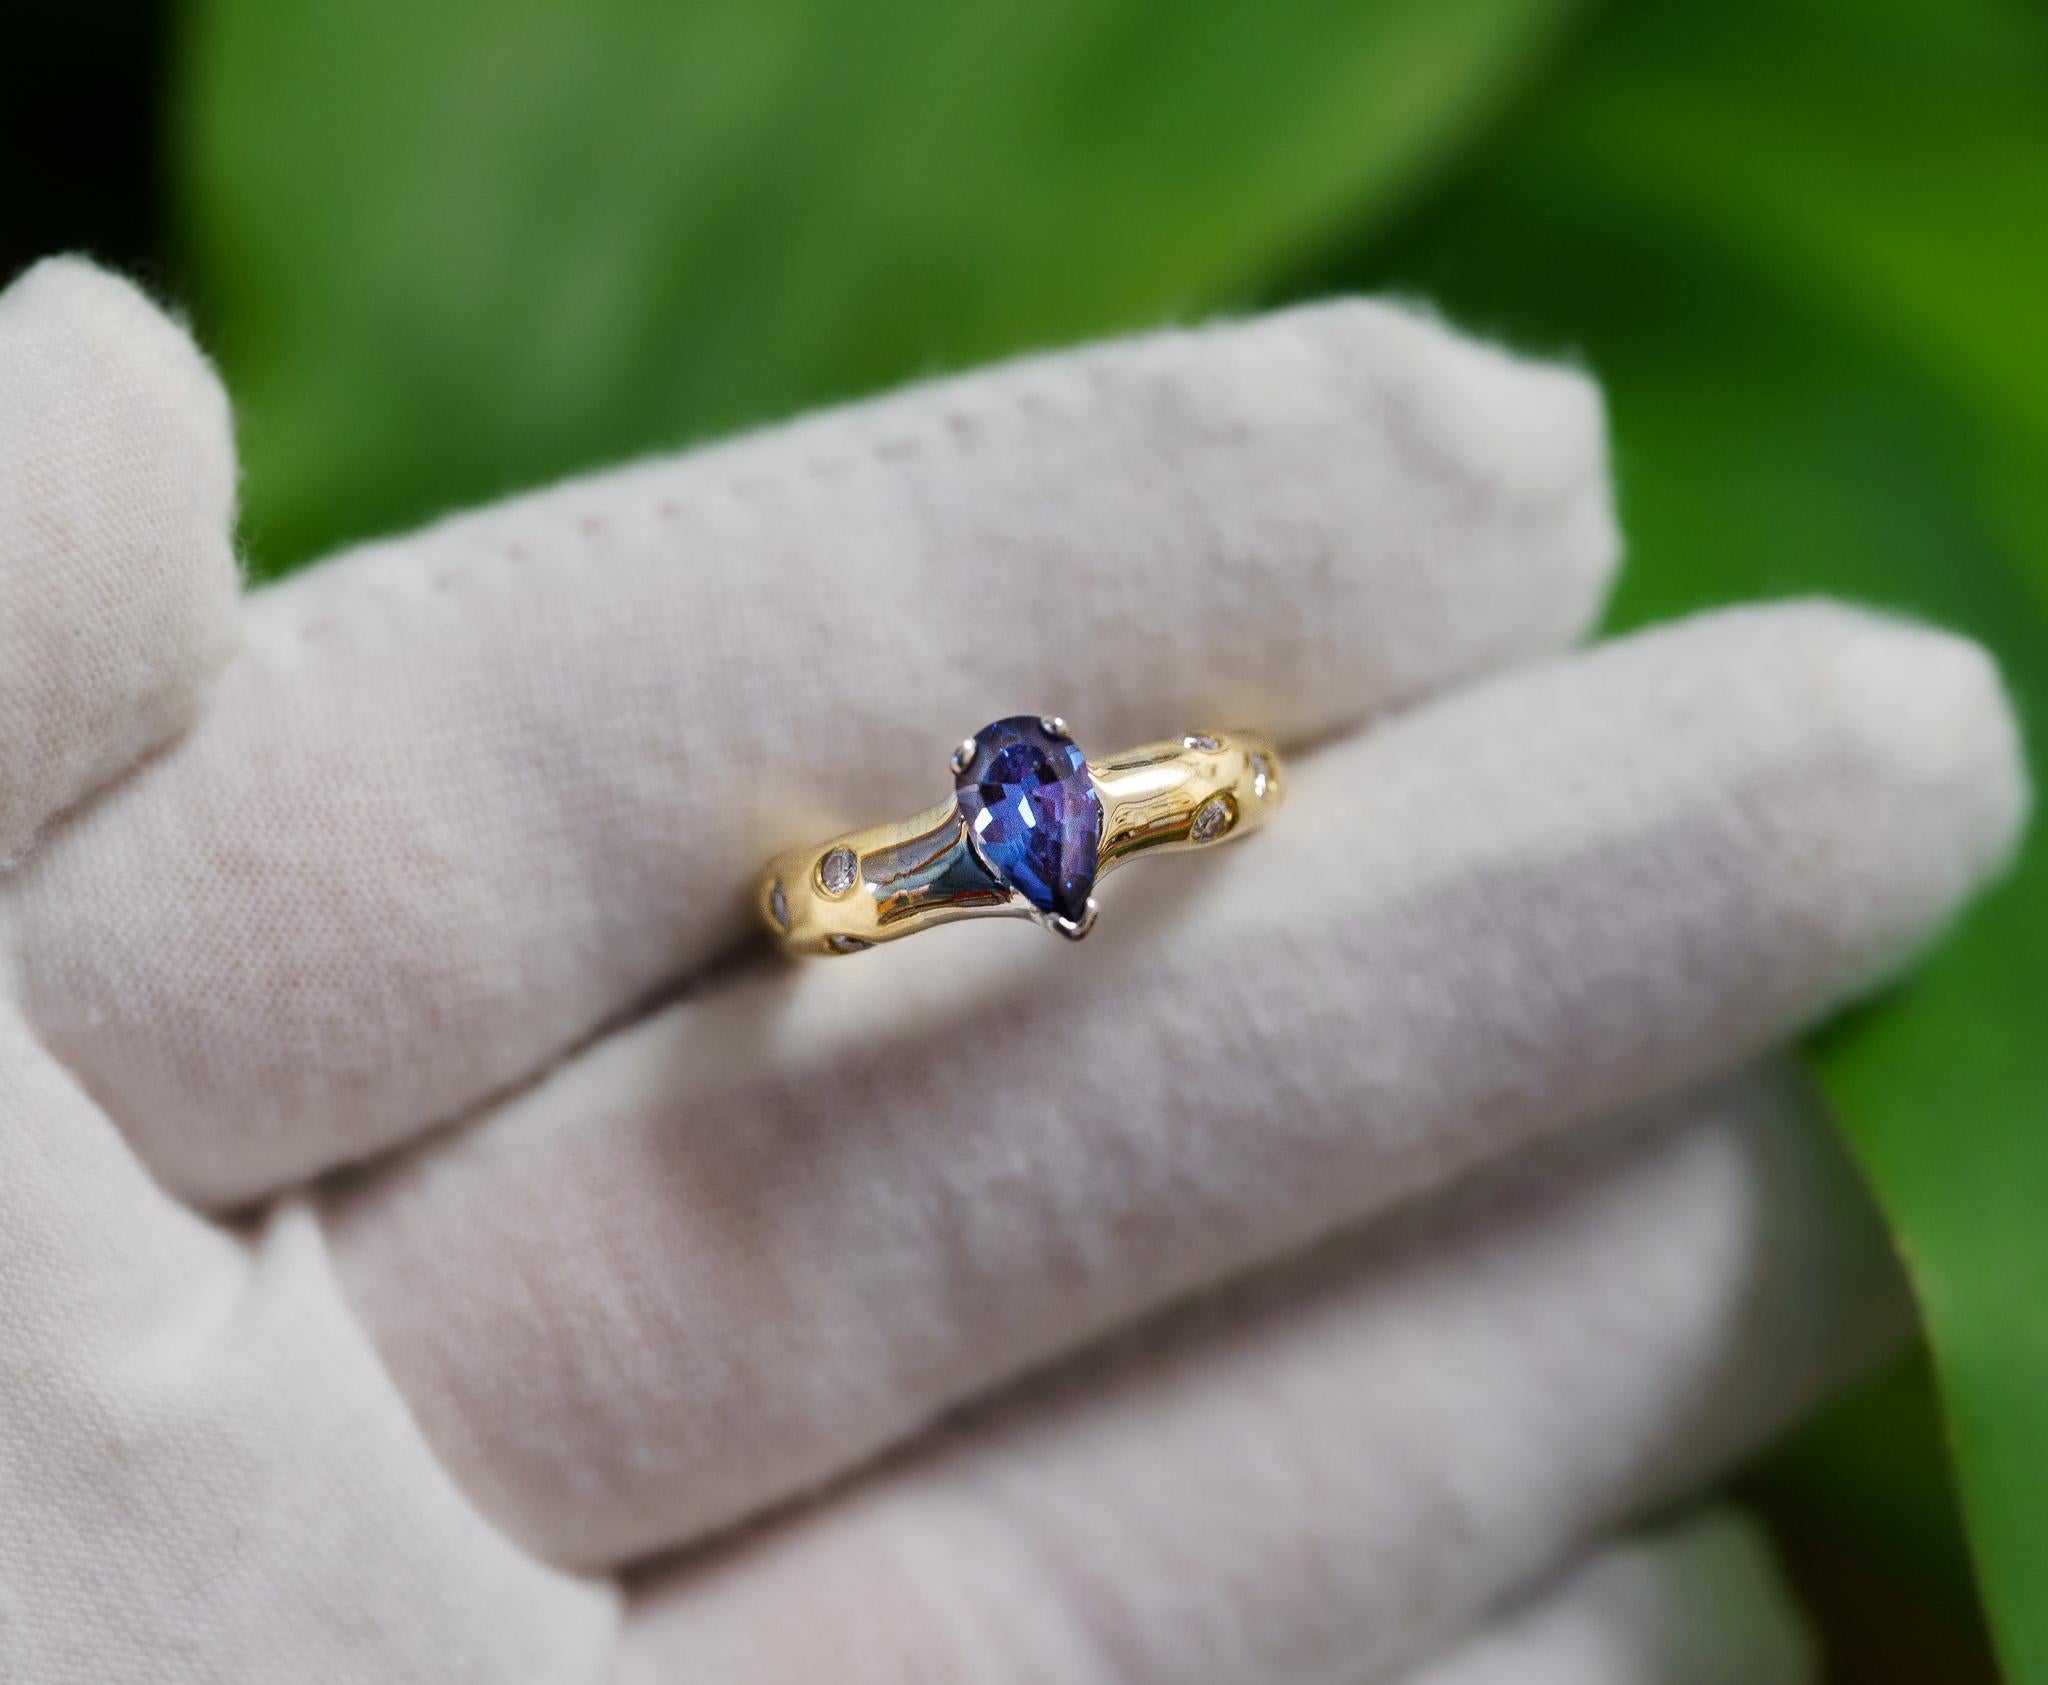 GIA Certified Untreated Color Changing Brazilian Alexandrite. The best that Mother Nature has to offer.

This ring features a 0.90 carat pear-cut Alexandrite. This Alexandrite has Brazilian origins and radiates a green-blue hue that changes to